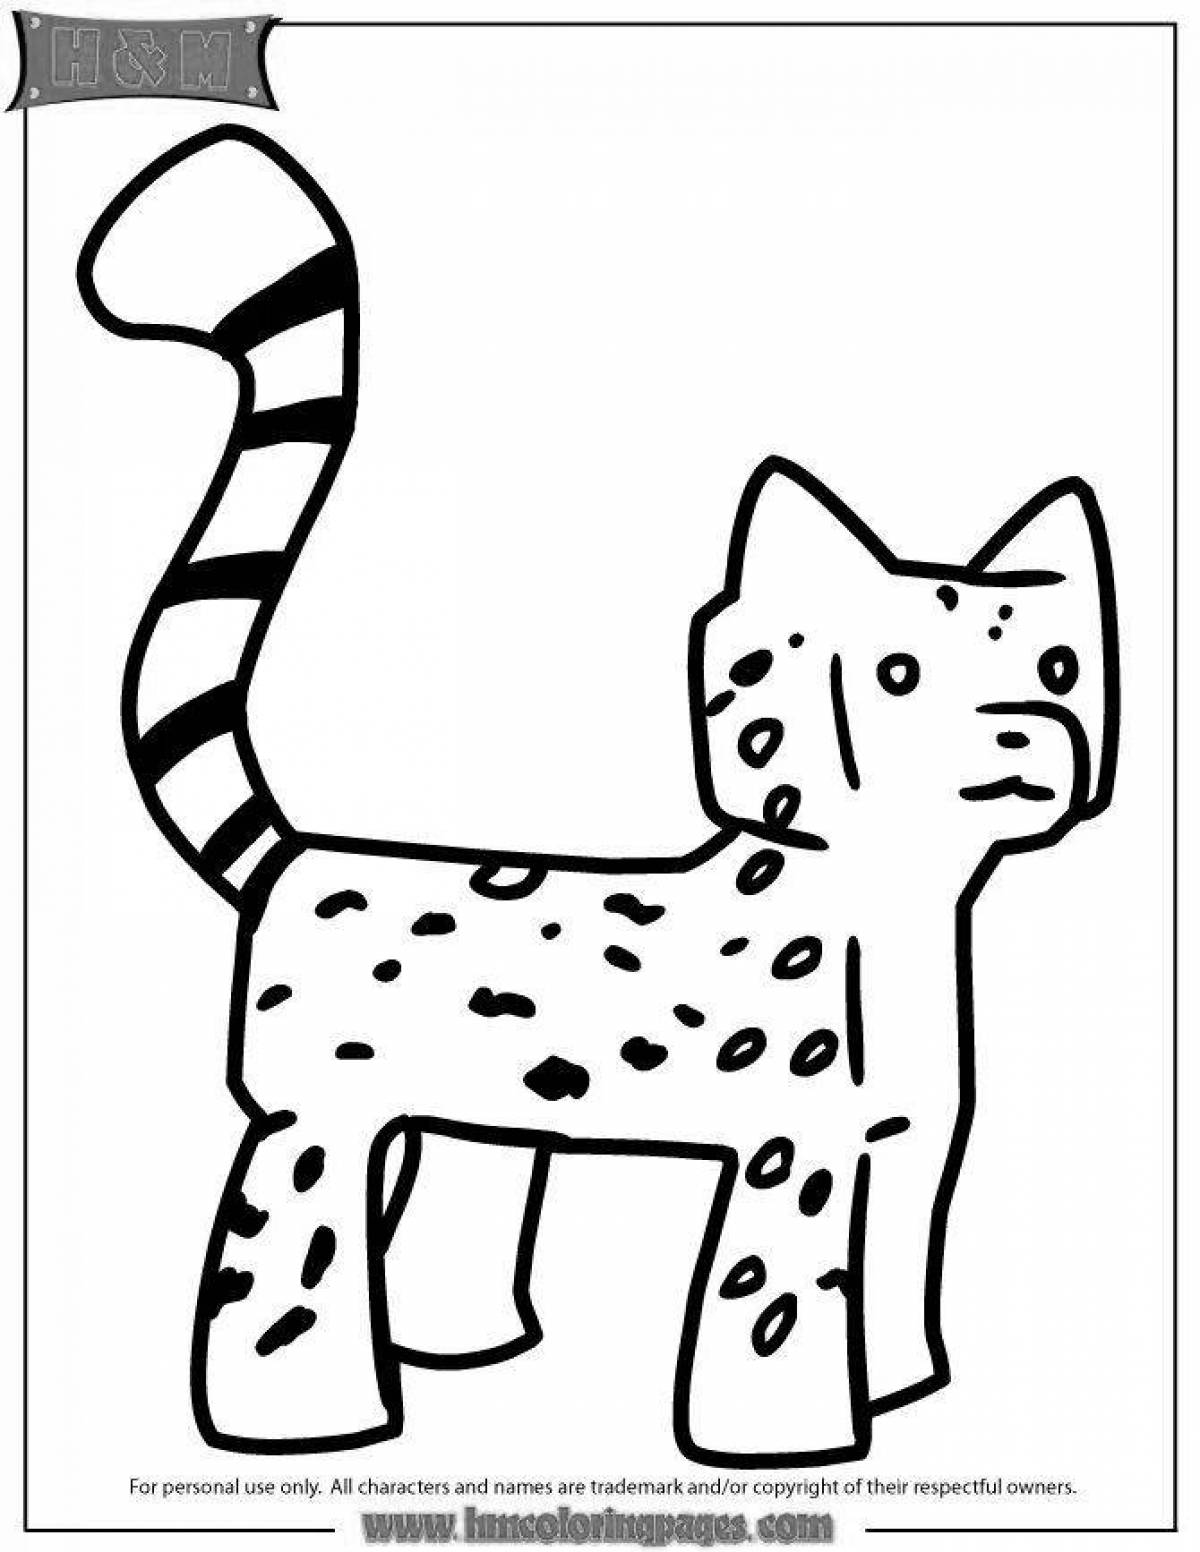 Playful minecraft cat coloring page